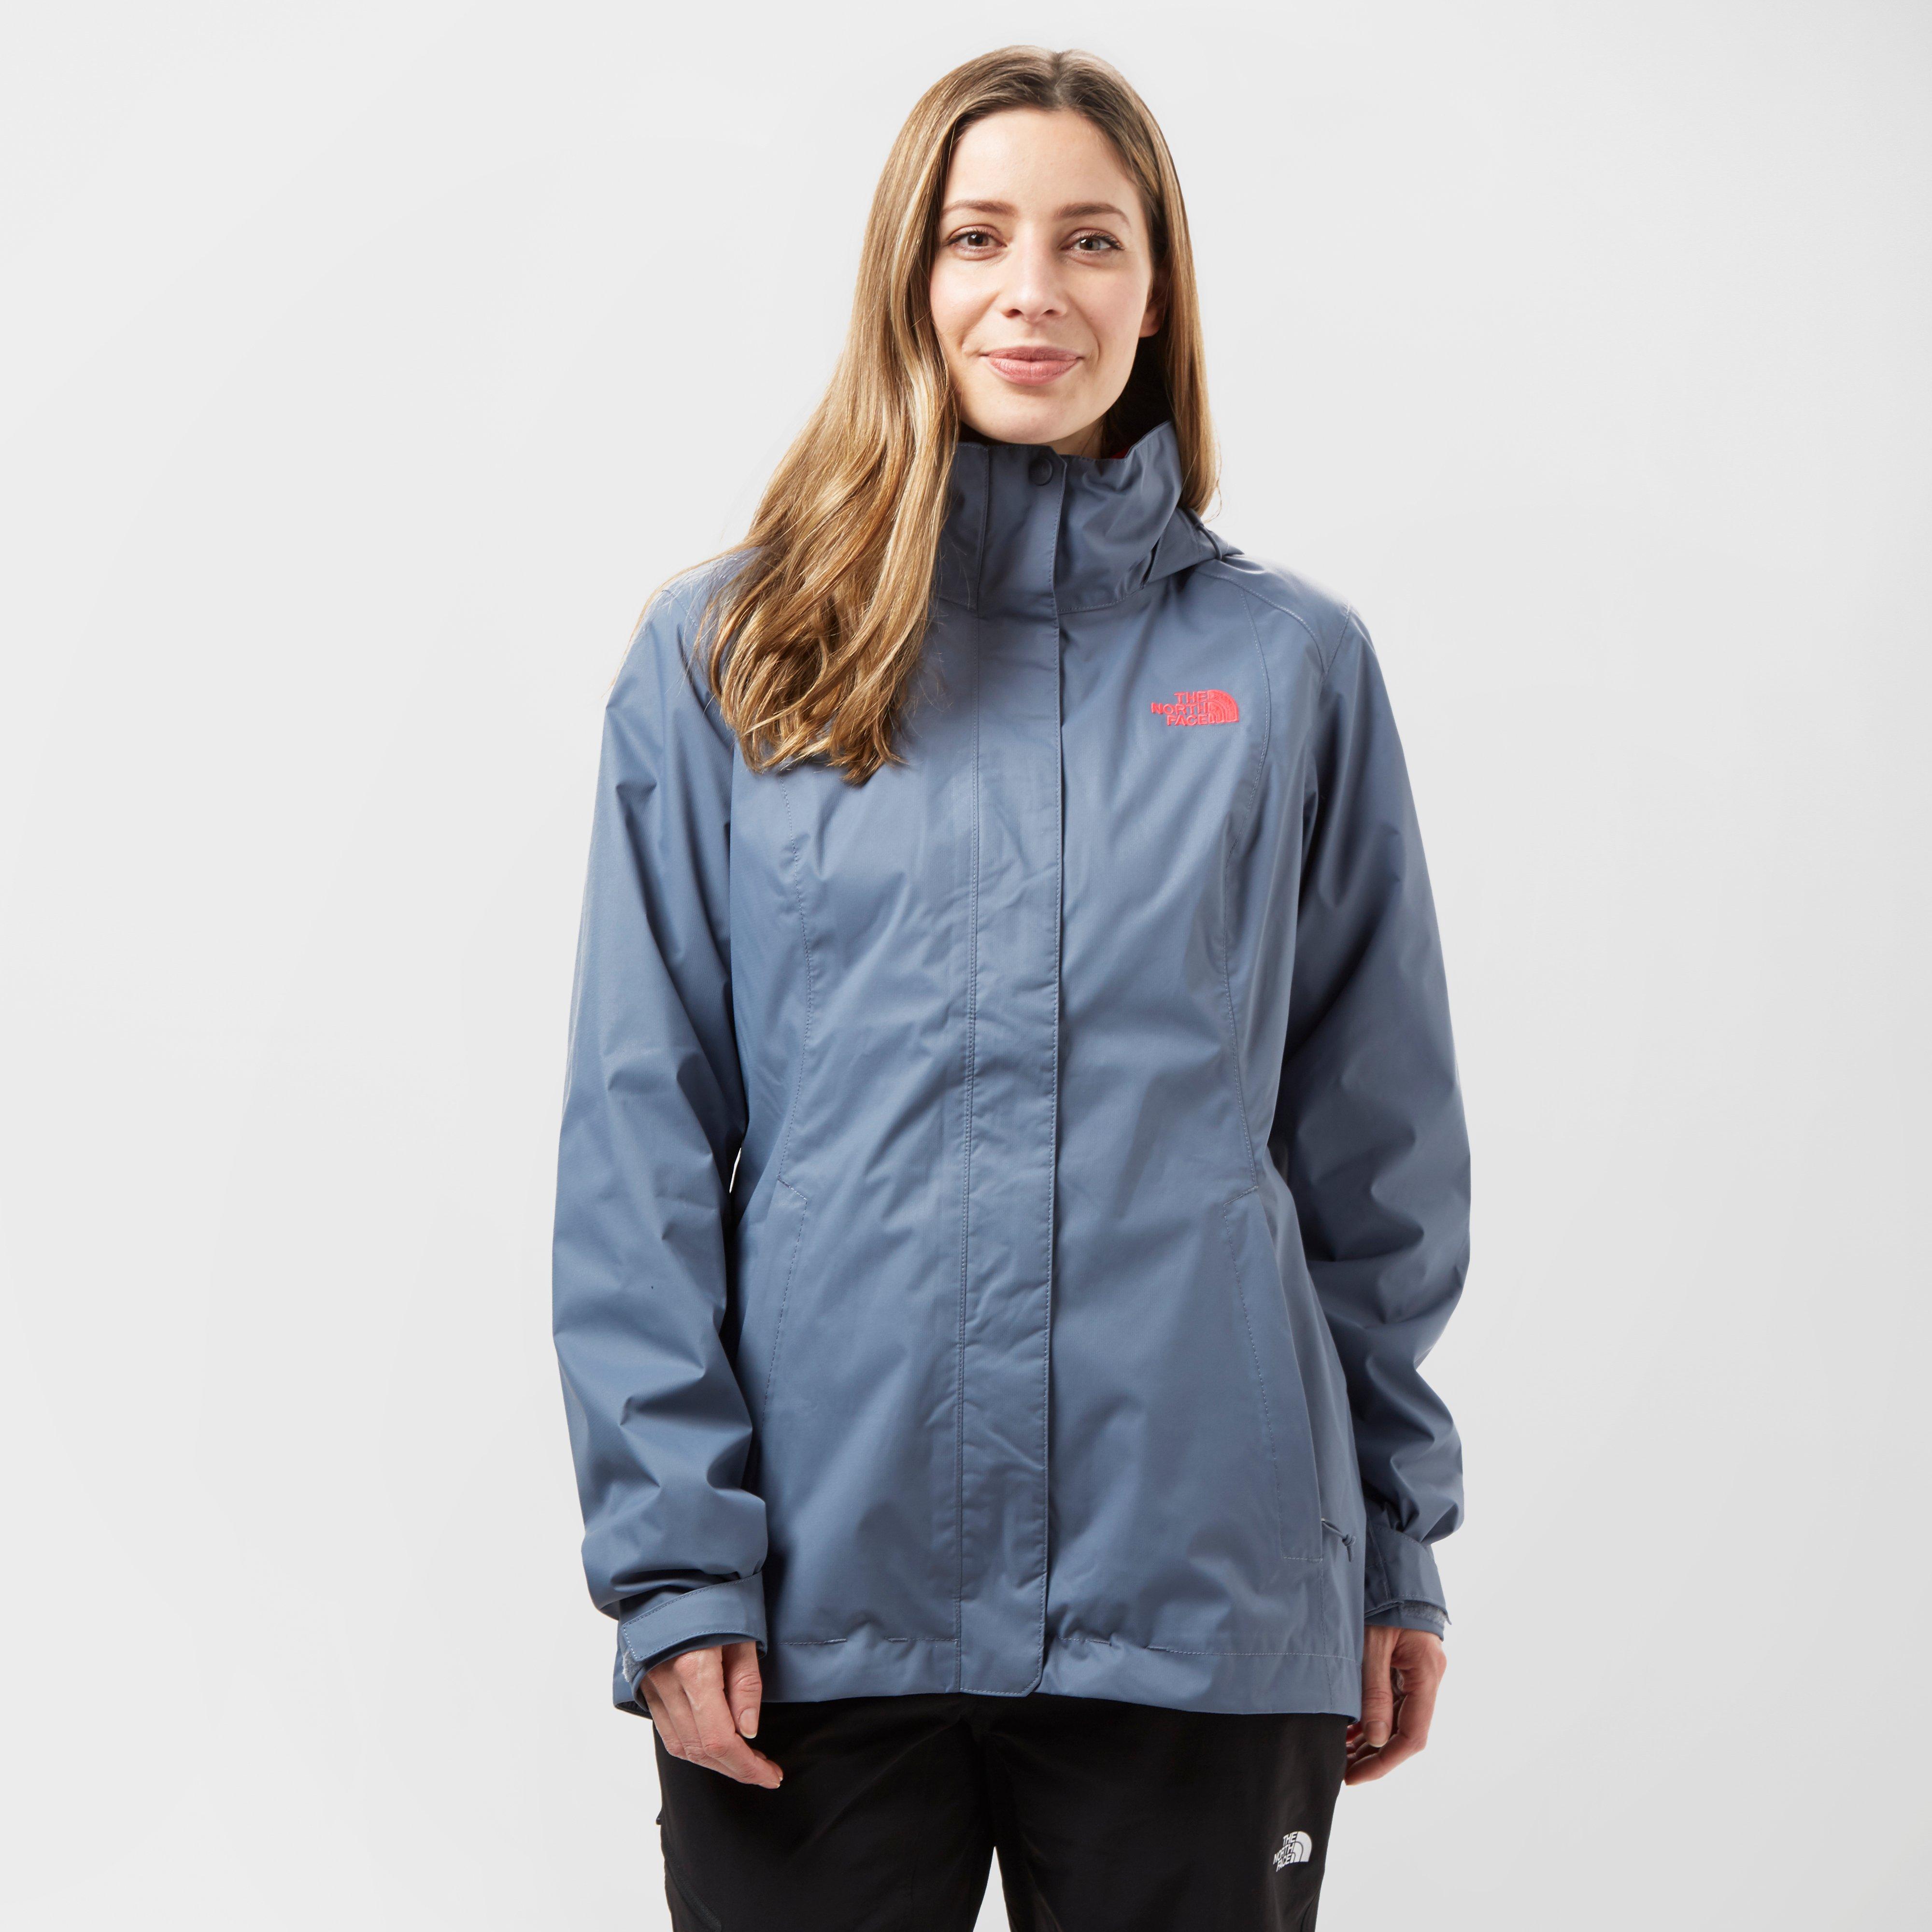 north face evolution triclimate jacket women's